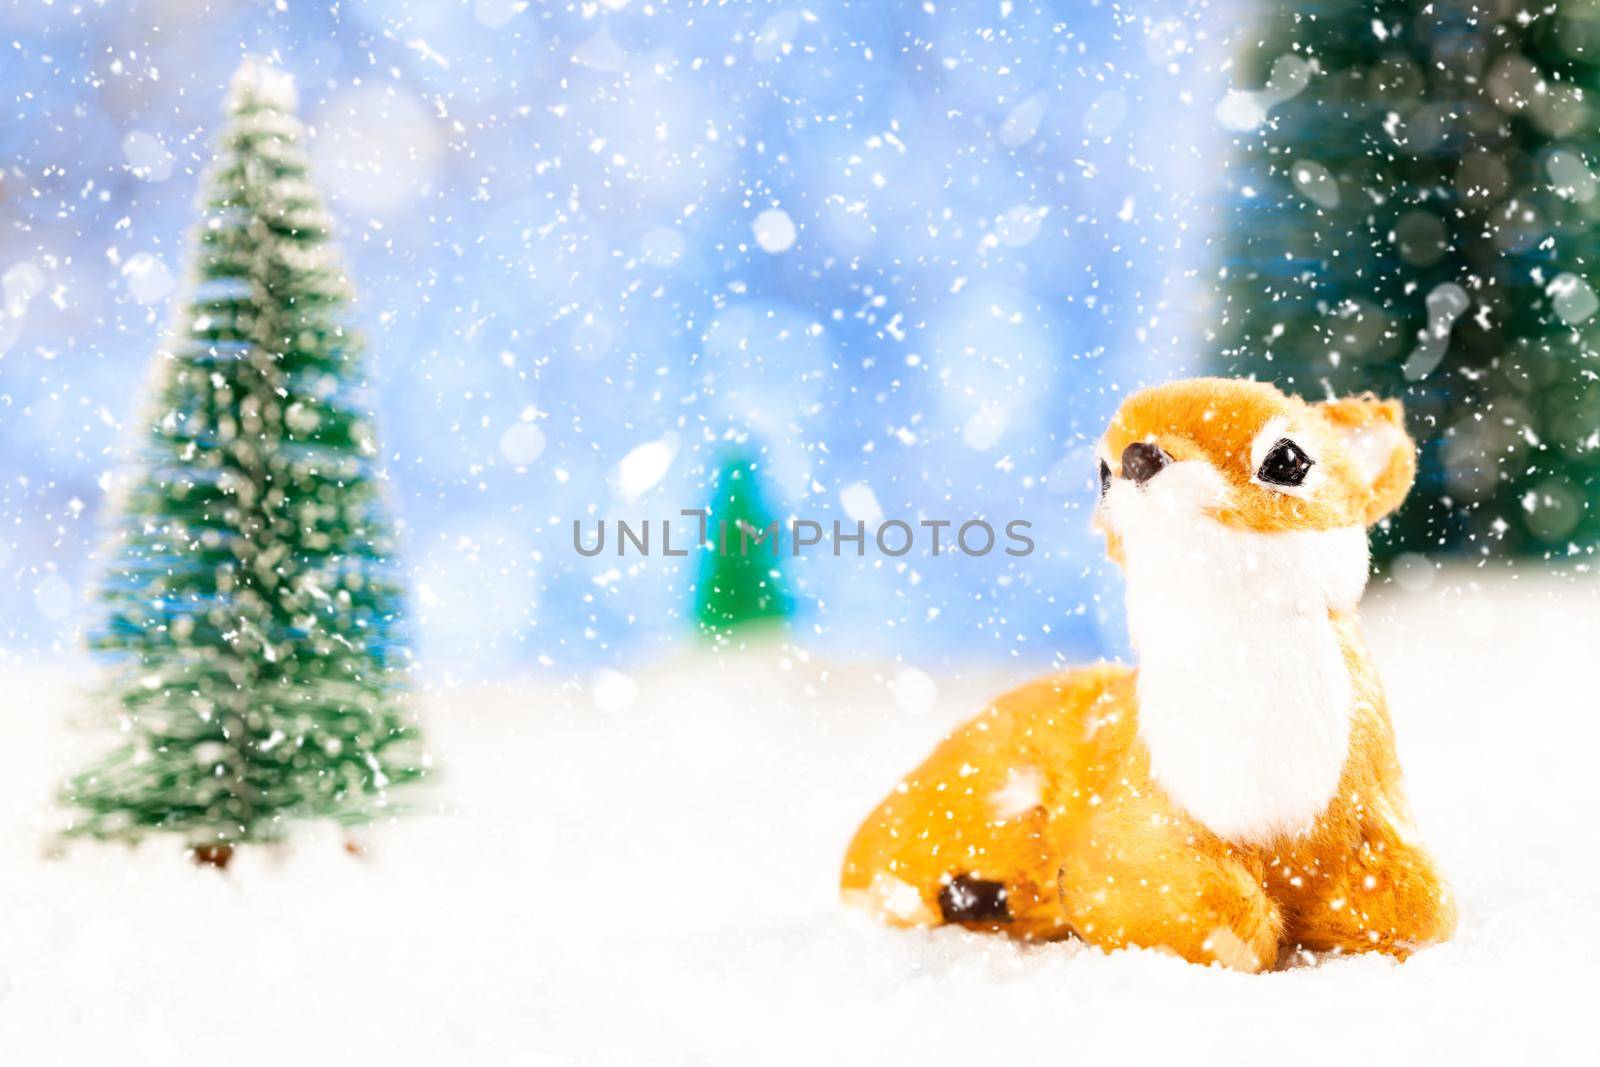 little toy deer sits in the snow. Around toy fir trees. New year greeting card.